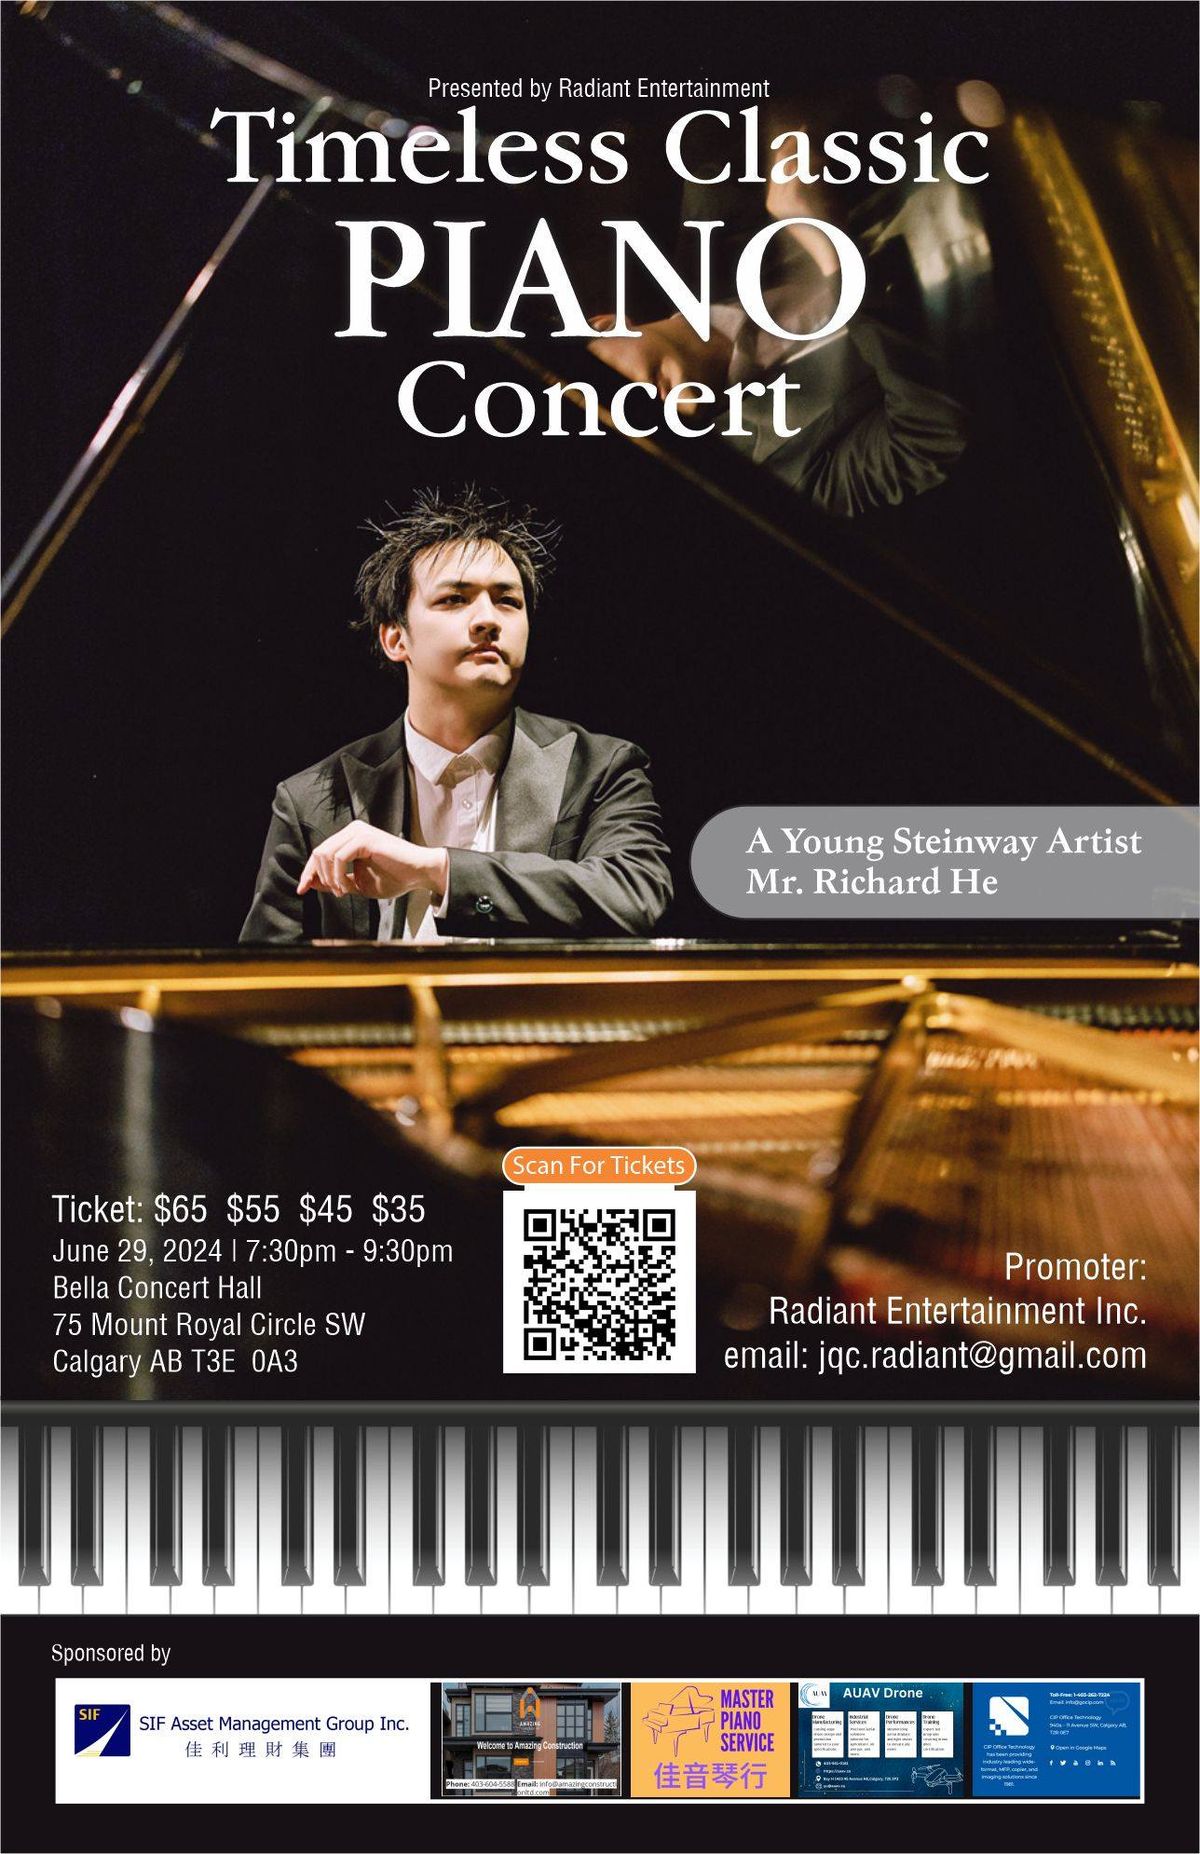 Richard He (Young Steinway Artist) Live in Concert